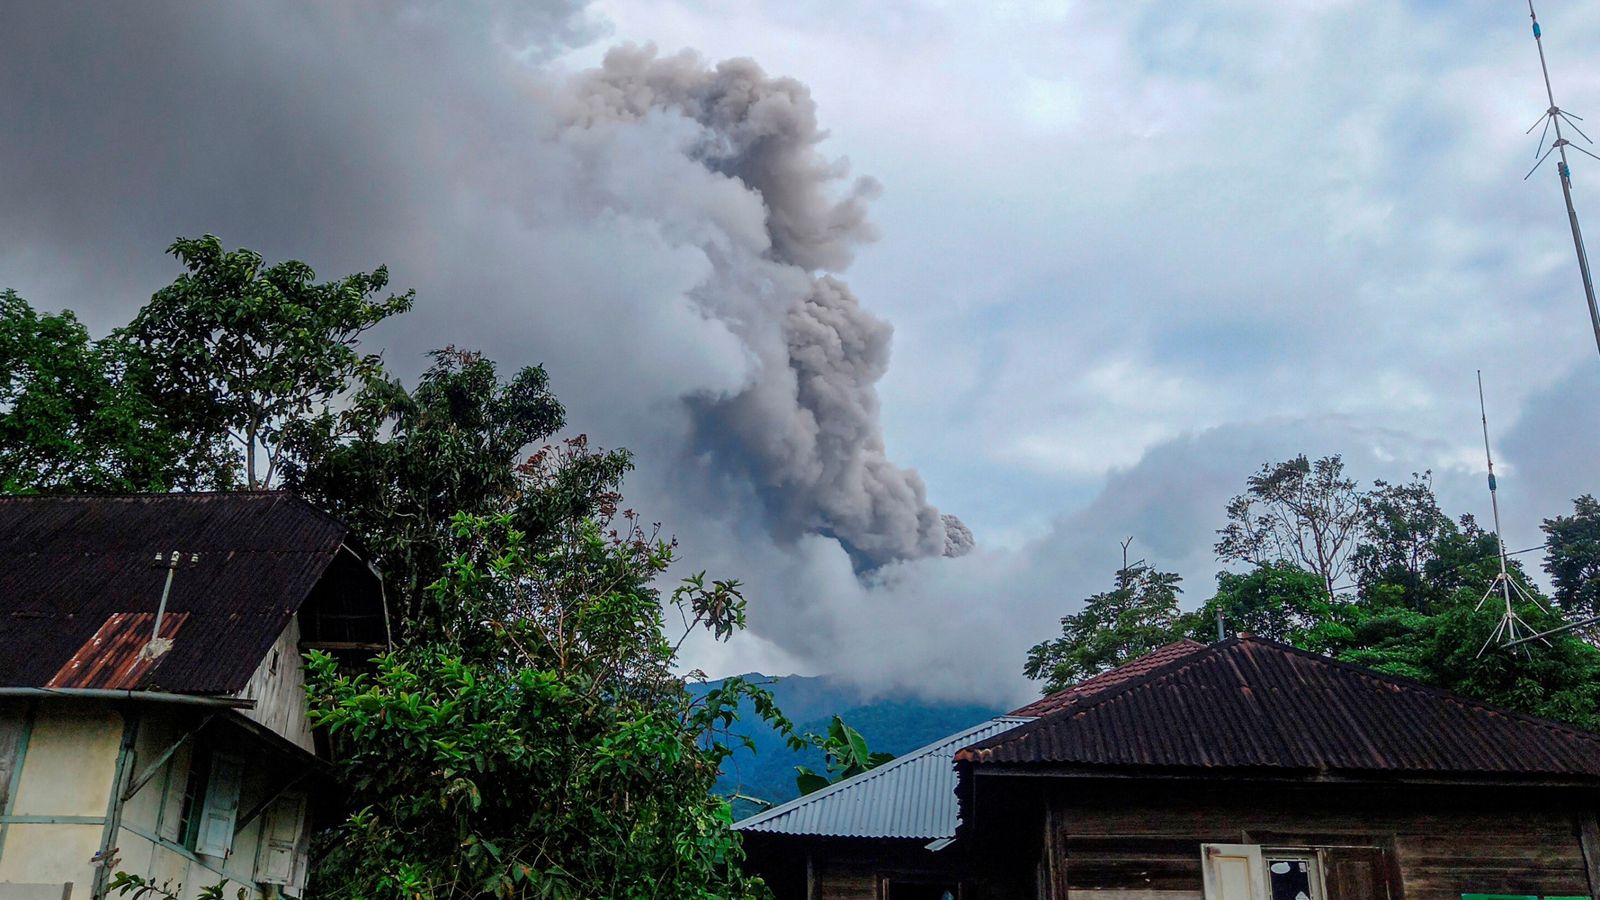 Mount Marapi volcano eruption in Indonesia leaves at least 23 dead, officials say